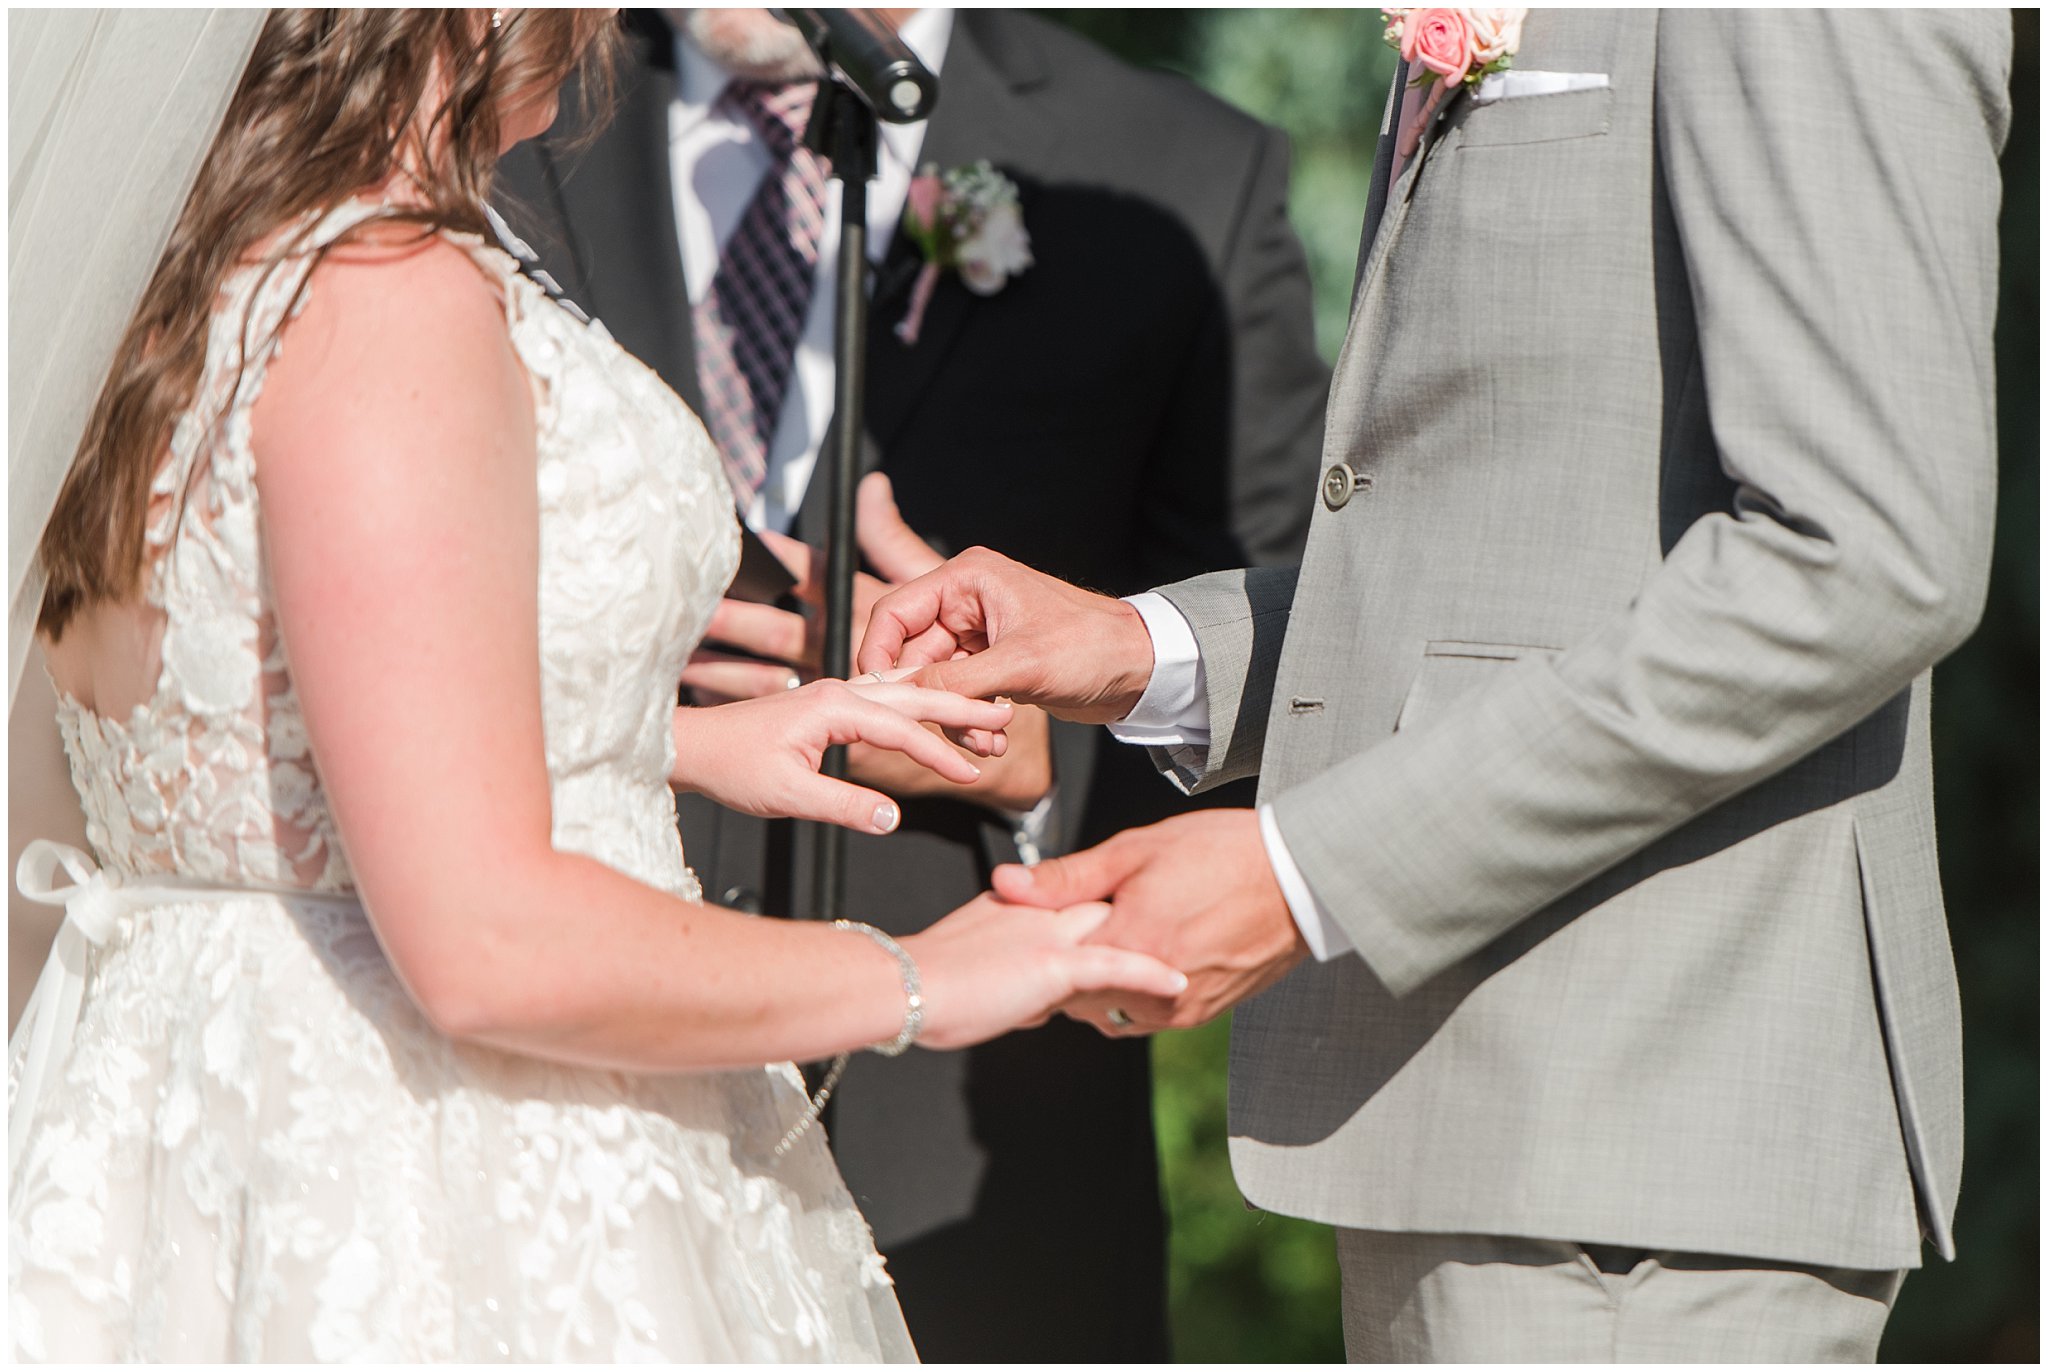 Exchanging rings | Oak Hills Utah Dusty Rose and Gray Summer Wedding | Jessie and Dallin Photography